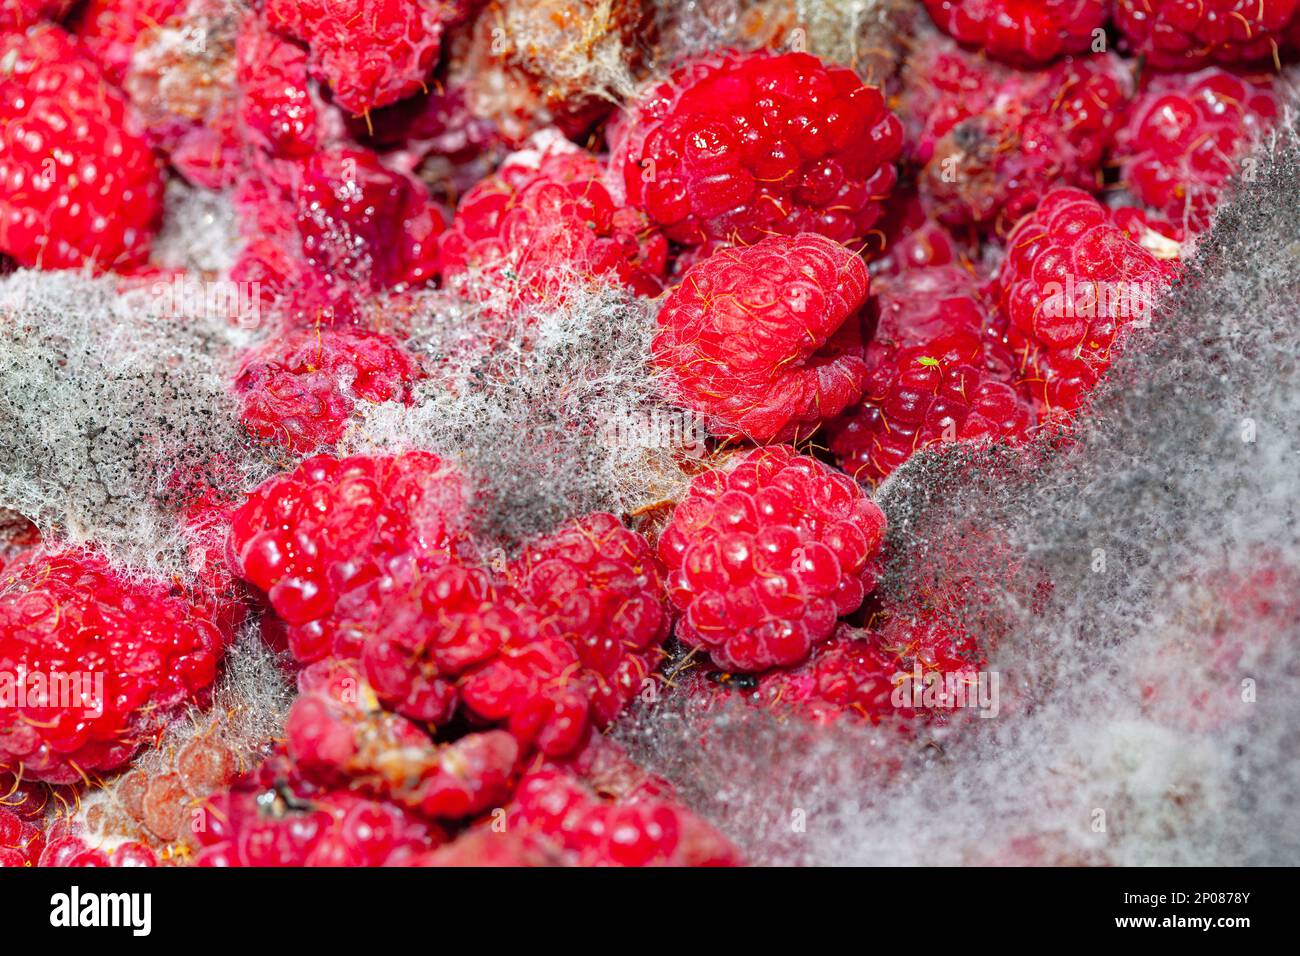 Expired raspberry fruit in mold . Moldy red berries Stock Photo